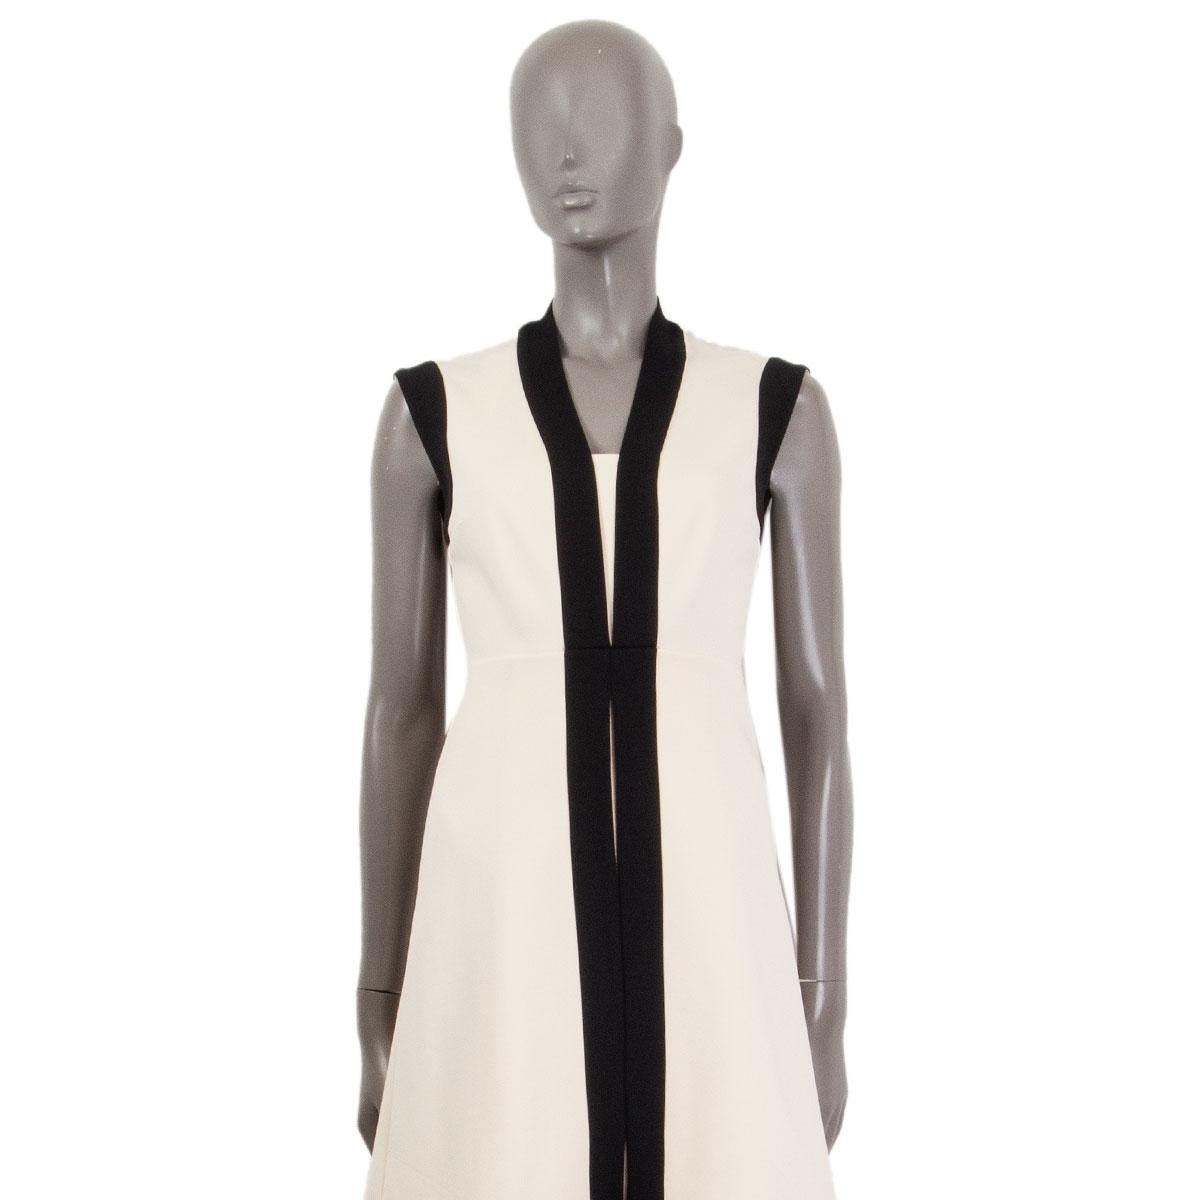 100% authentic Gucci contrast trim dress in ivory and black viscose (75%) polyamide (17%) elastane (8%). With a contrast hemline in black, V-neckline, sleeveless and stretchy jersey fabric. Has been worn and has minor stain on the front and back